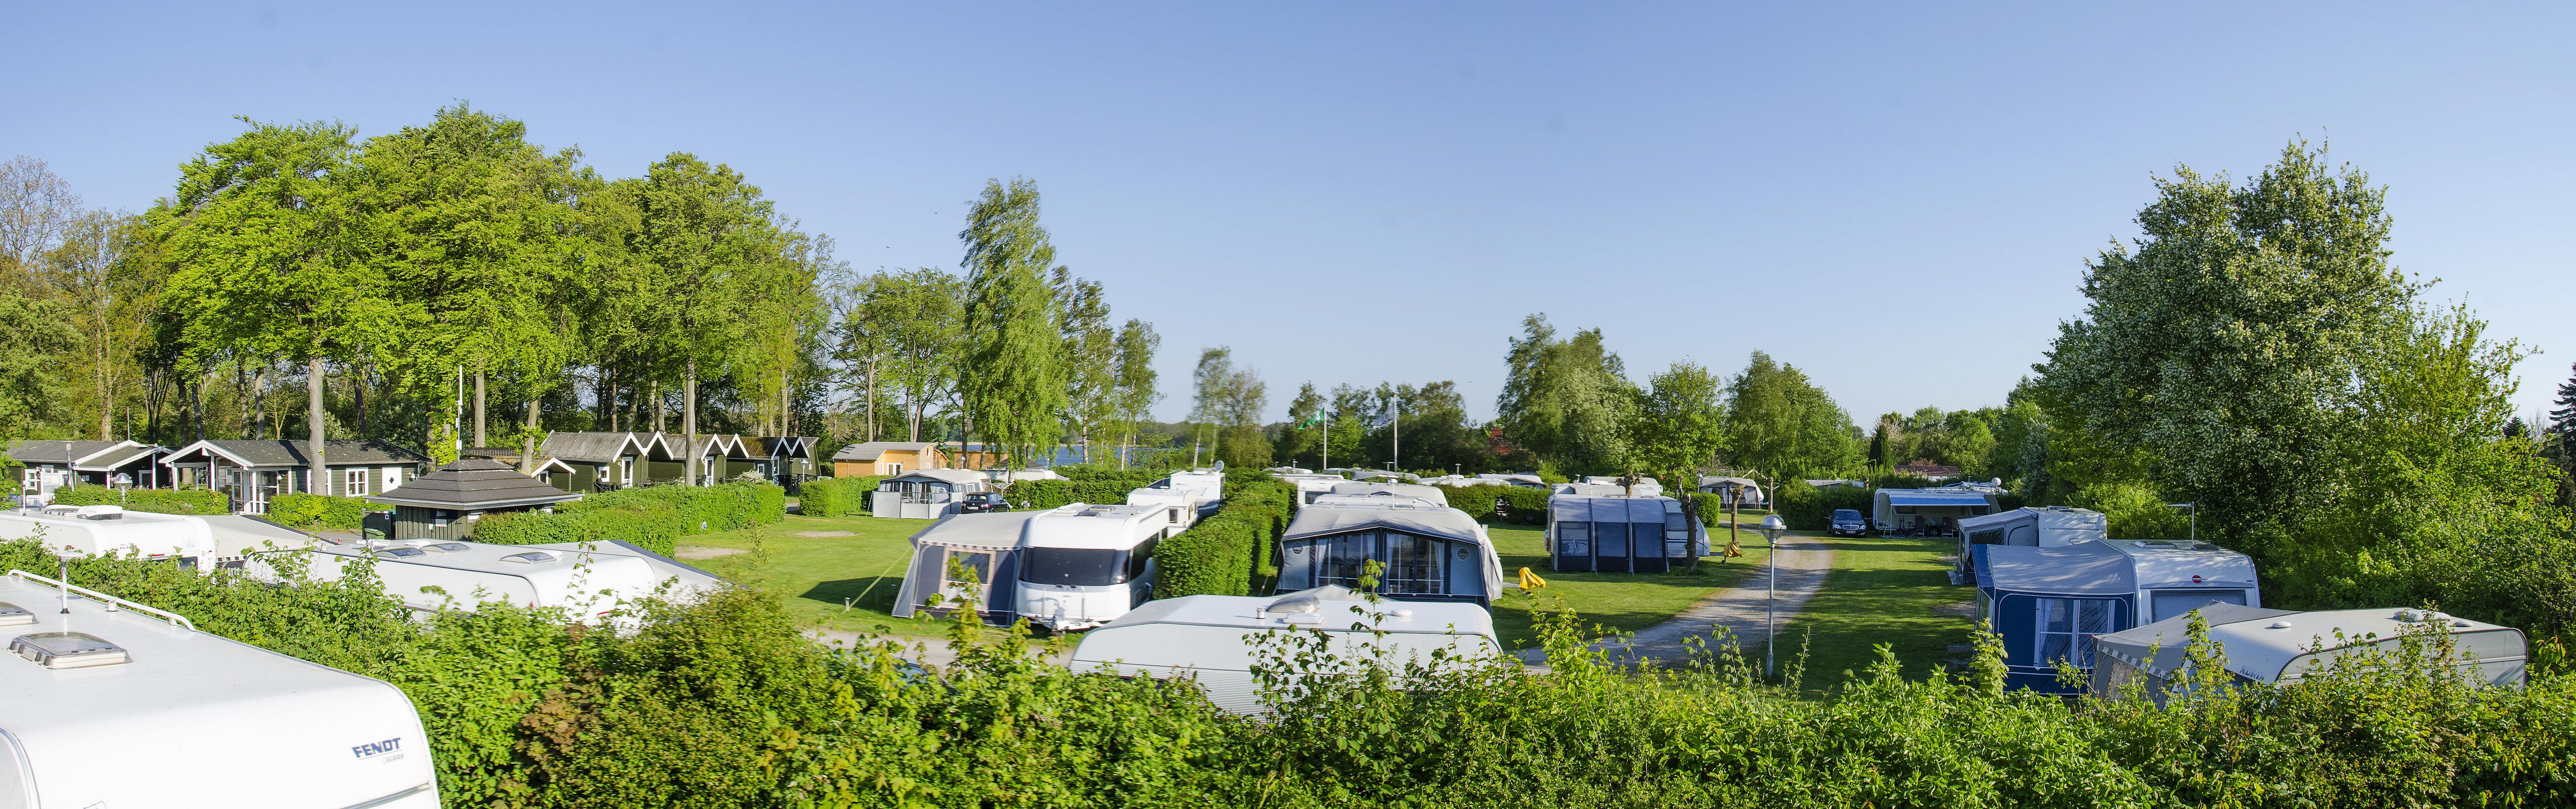 Emplacement - Emplacement Nature - Nysted Strand Camping